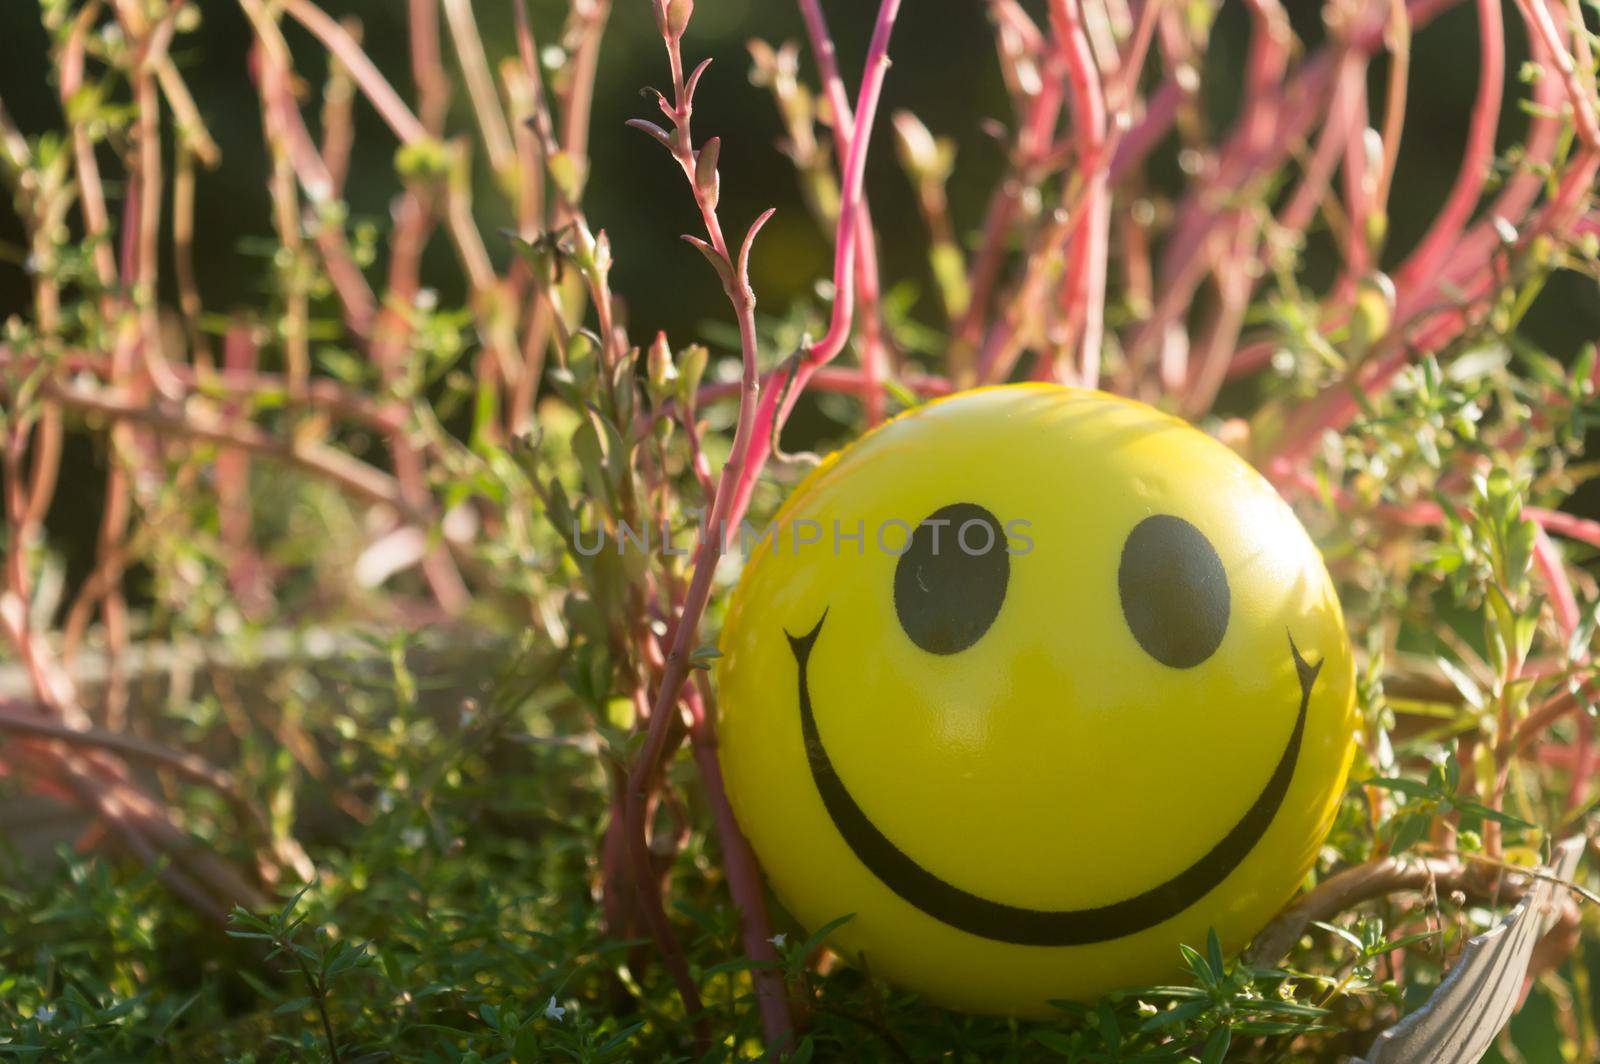 Closeup Emoji sign Smiley Face of a Squeeze Ball mouth representing a symbol of happiness, placed on plants and nature background. Front view. Happy smile background concept. by sudiptabhowmick